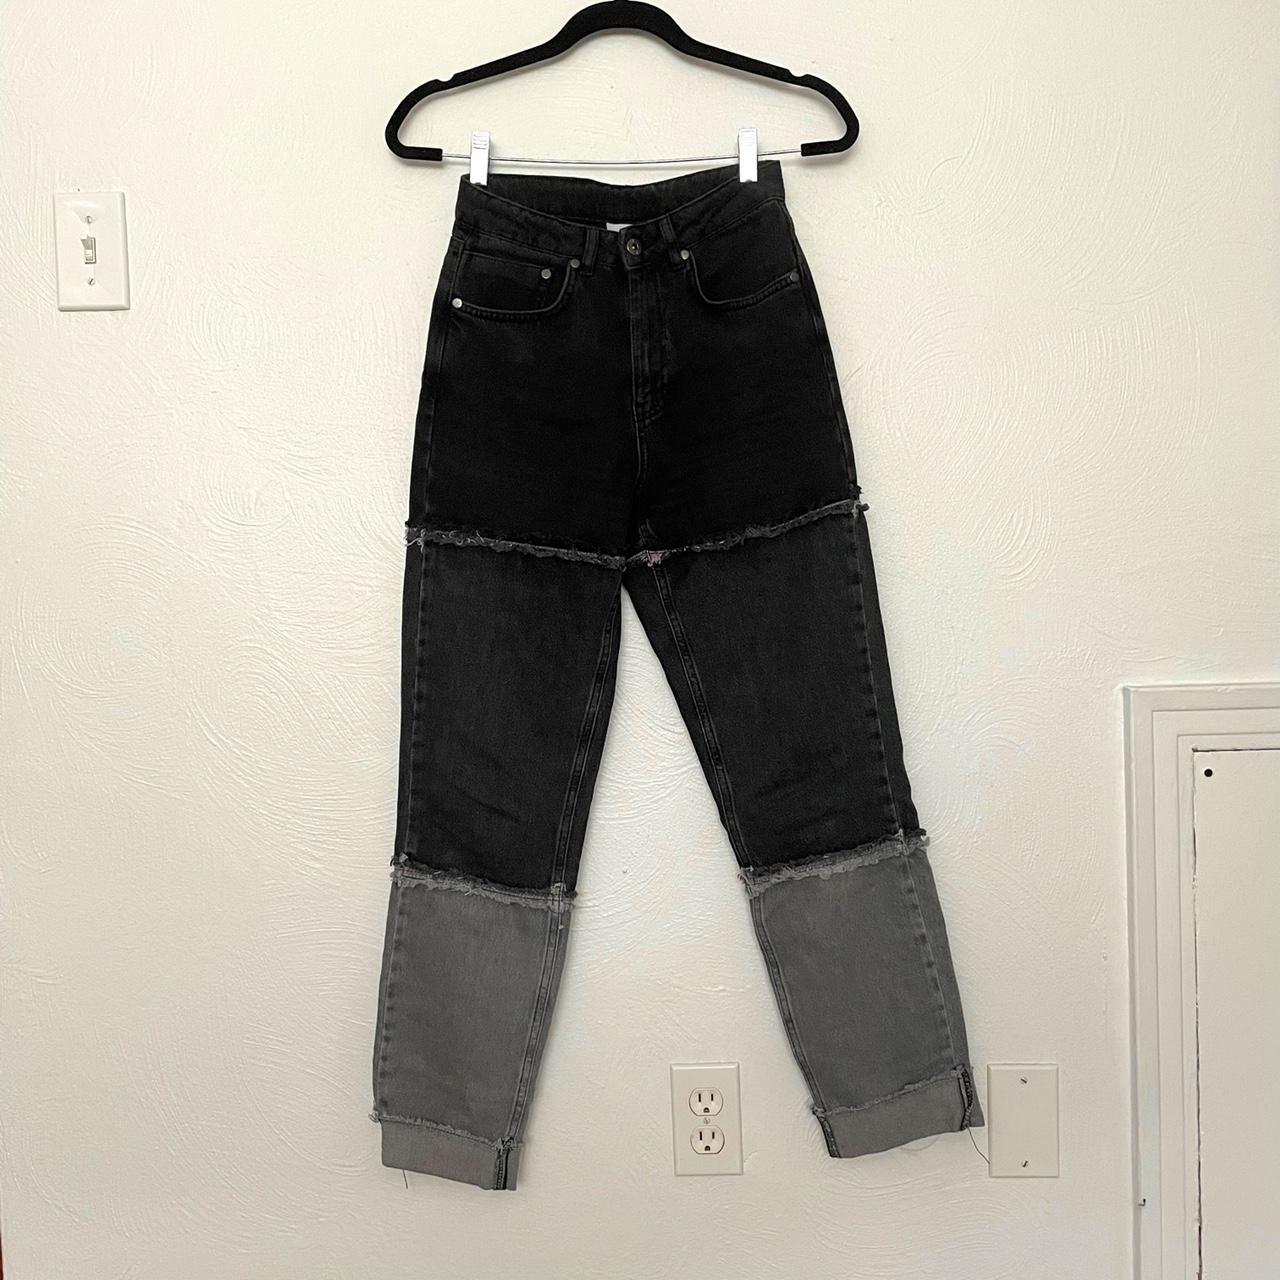 Product Image 2 - Ragged Priest mom jean!

3-panel ombré